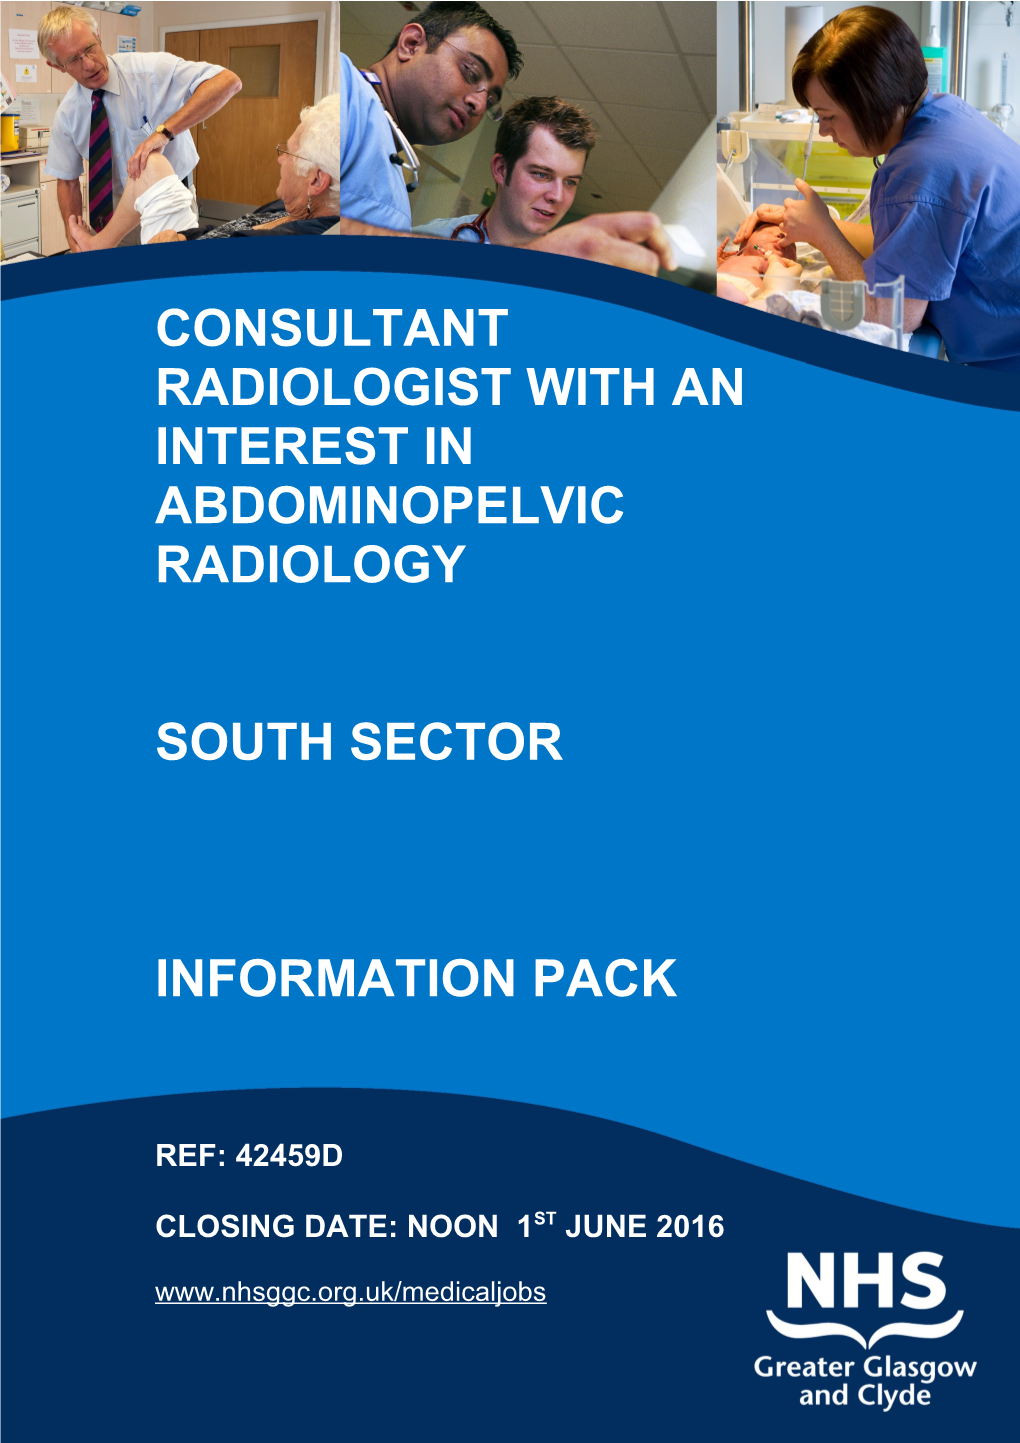 Consultant Radiologist with an Interest in Abdominopelvic Radiology